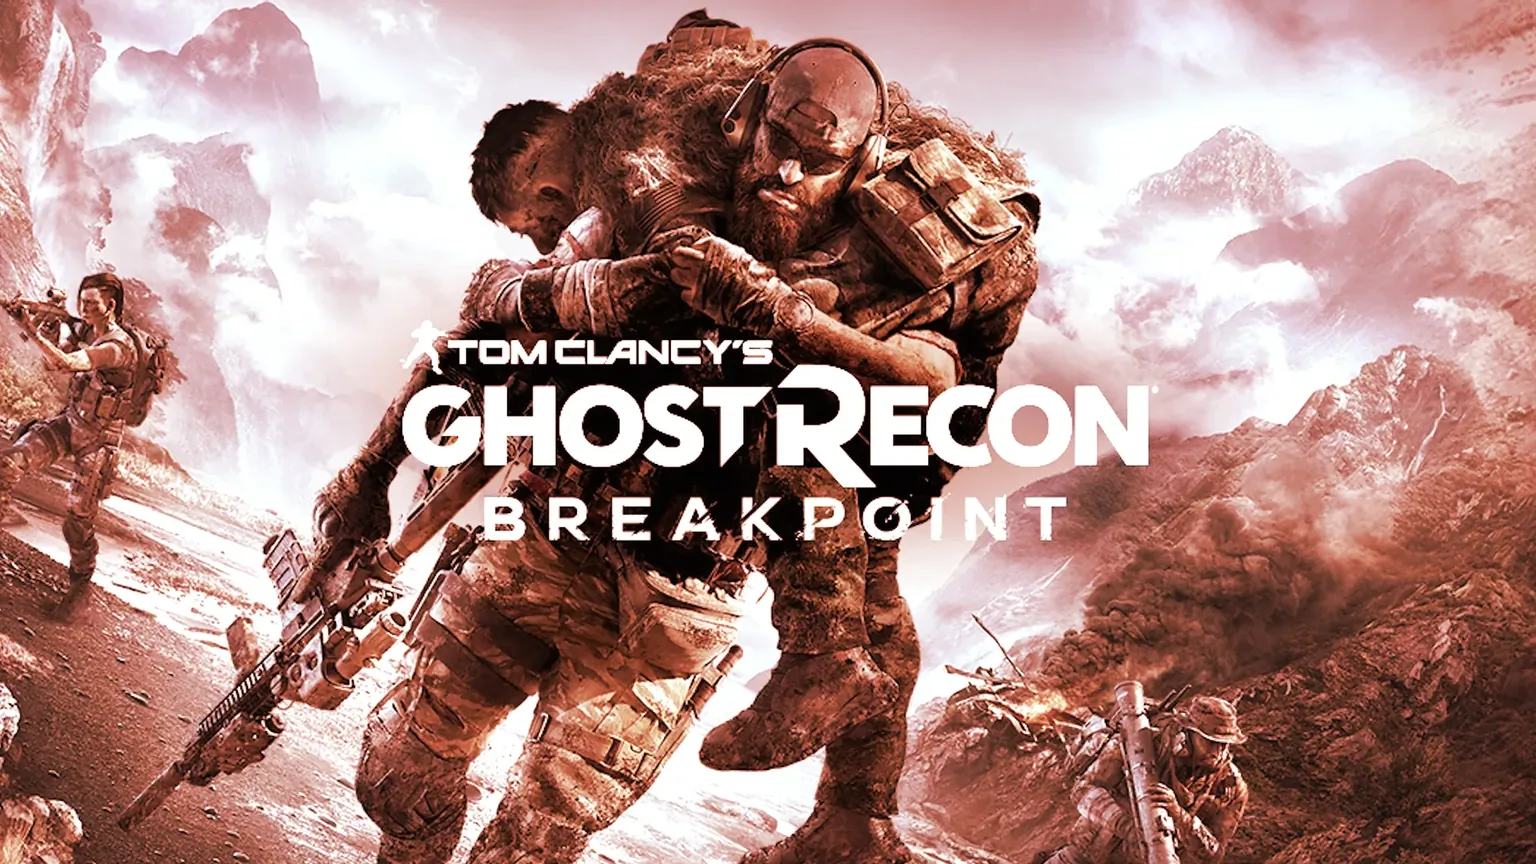 Ubisoft's Ghost Recon will now have in-game NFTs. Image: Ubisoft